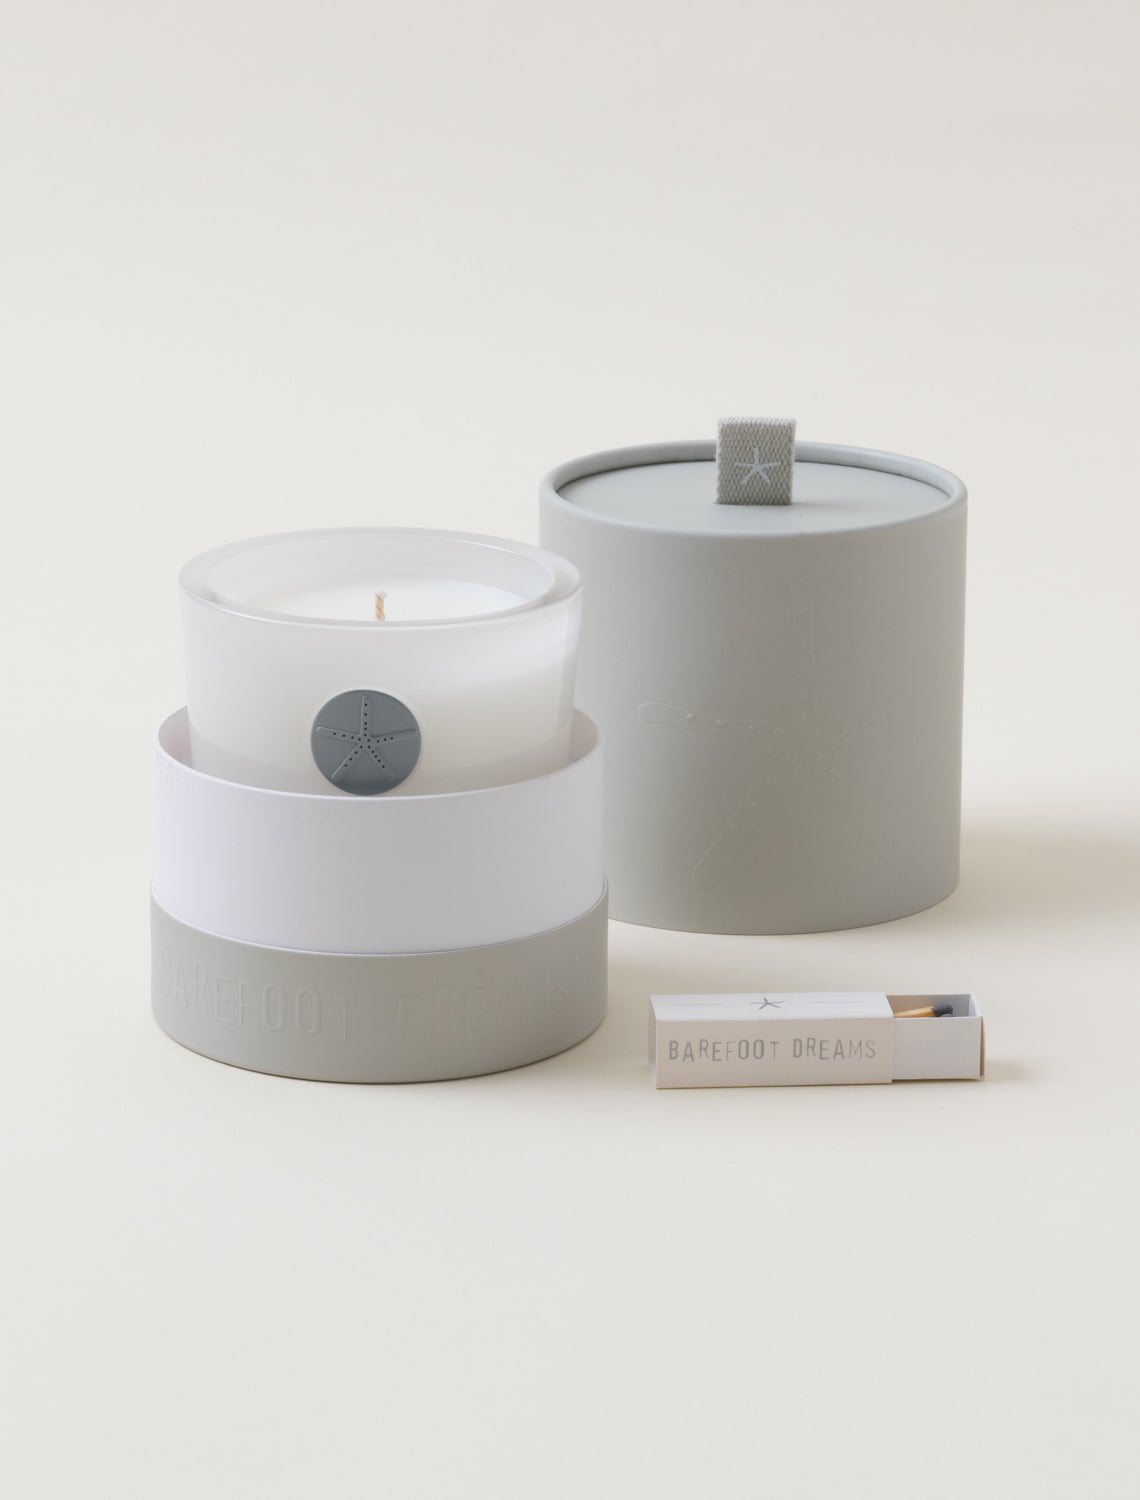 Barefoot Dreams Malibu Mist Luxe Soy Candle